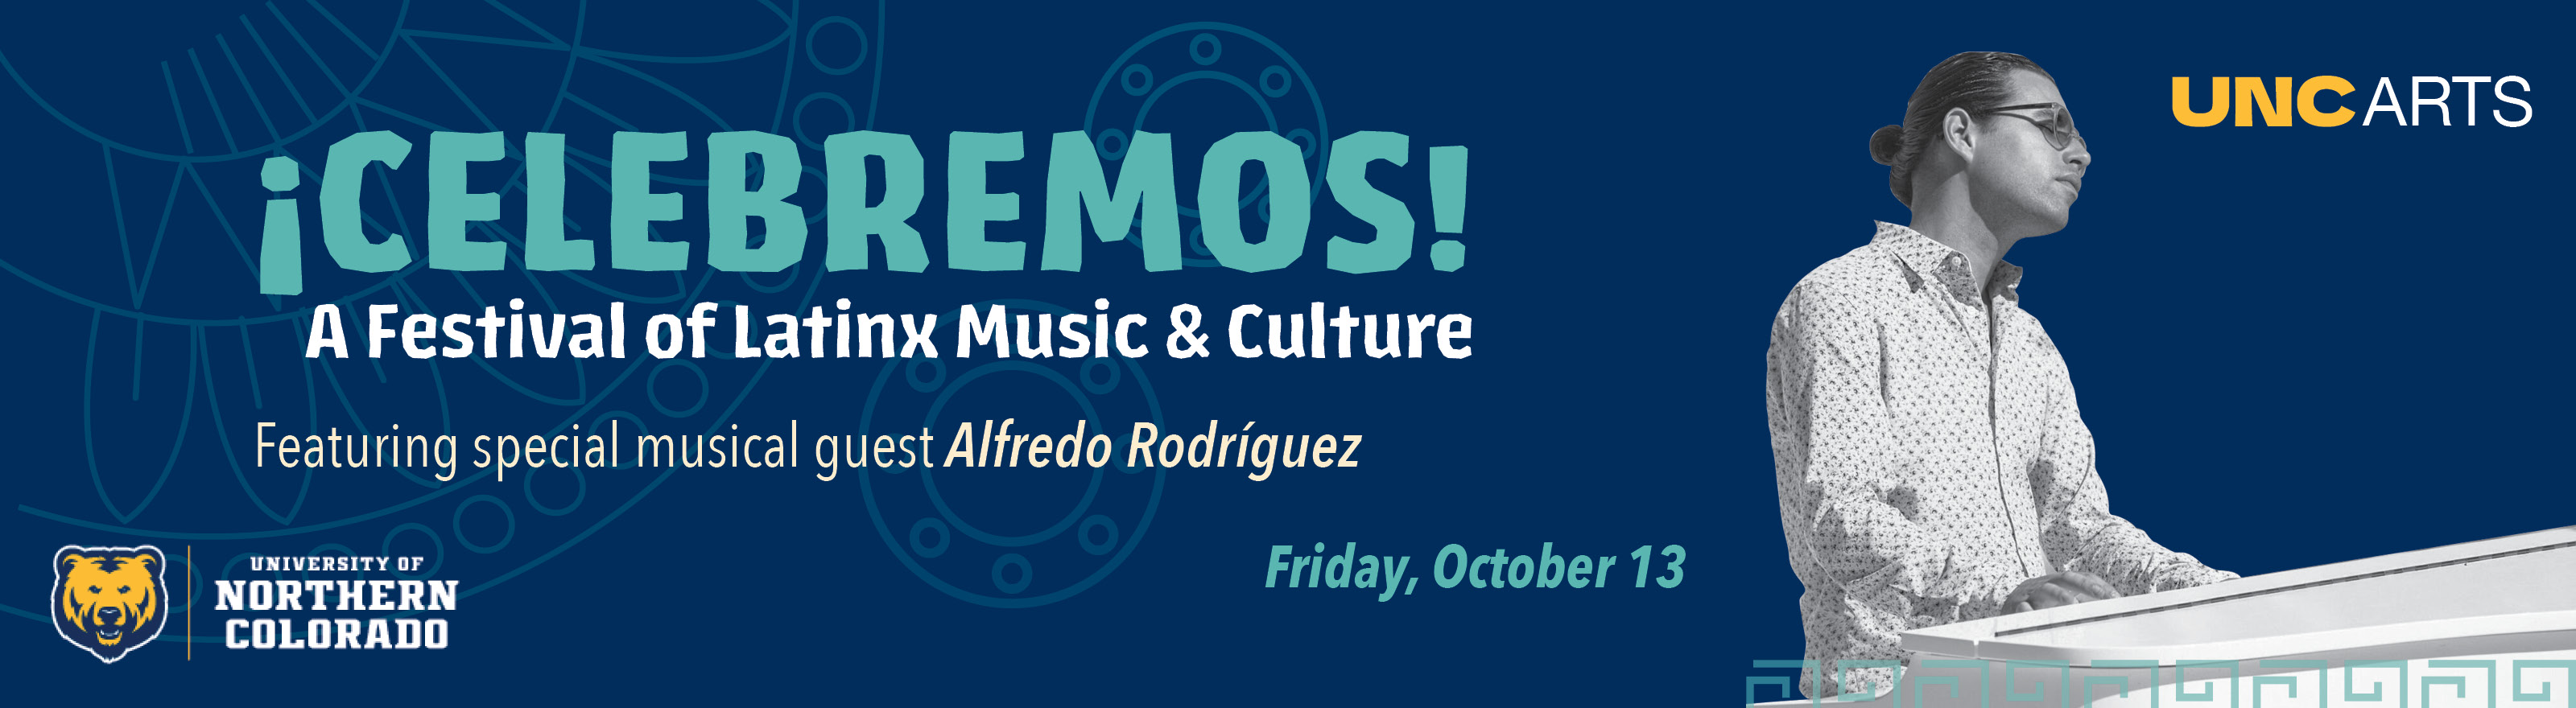 A graphic for ¡Celebremos!, a Latinx music and culture event